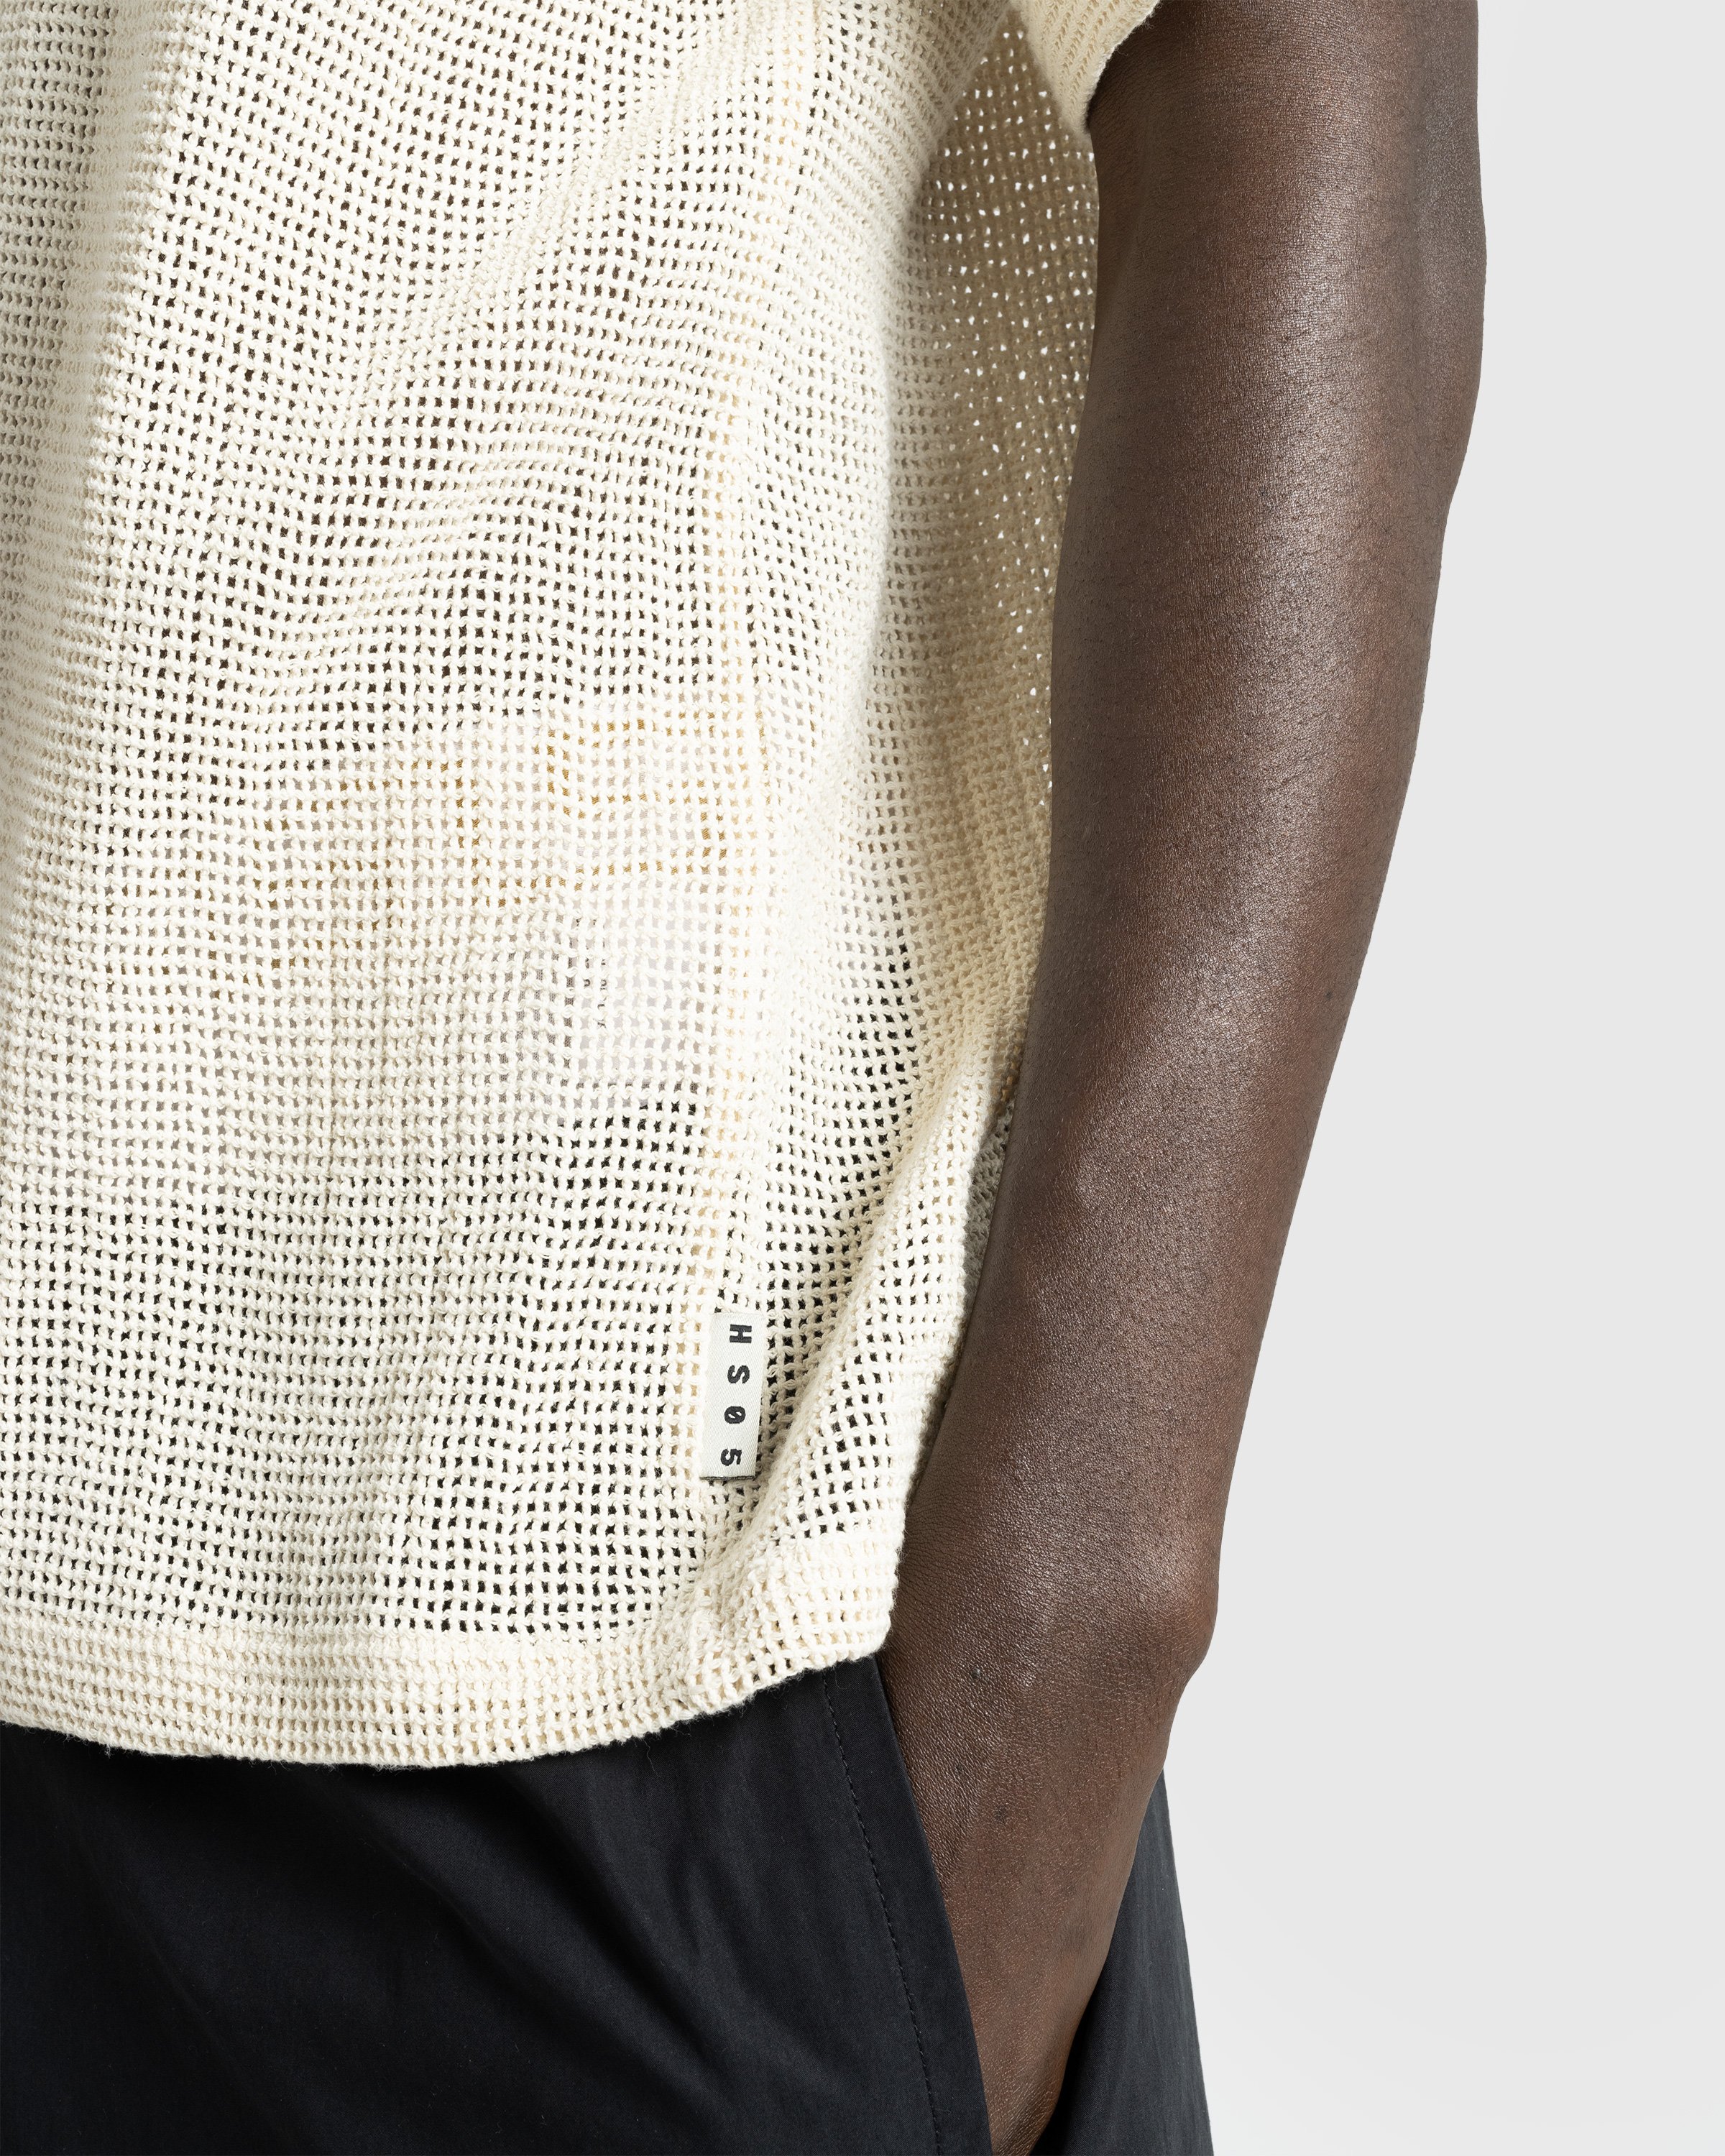 Highsnobiety HS05 - Pigment Dyed Cotton Mesh Knit Natural - Clothing -  - Image 6